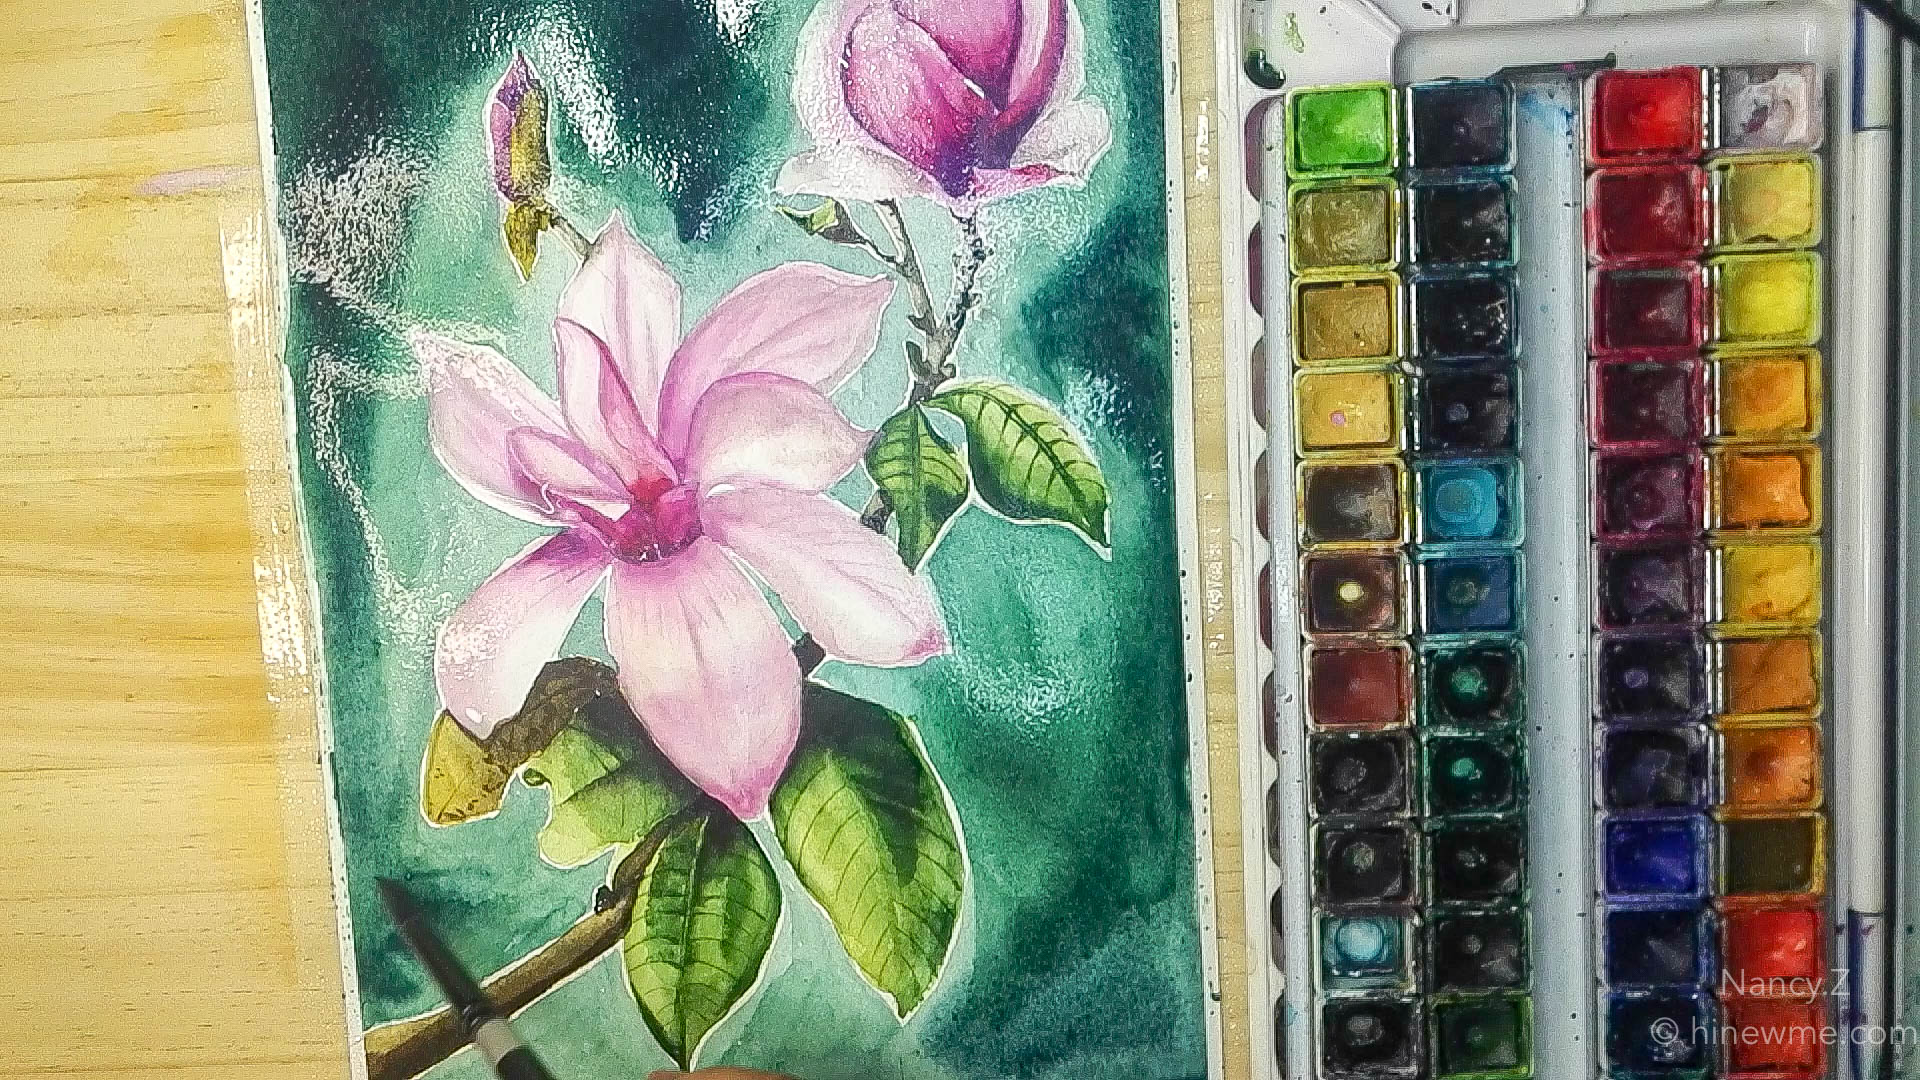 How to draw watercolor magnolia flowers step by step tutorial, come to see my online class